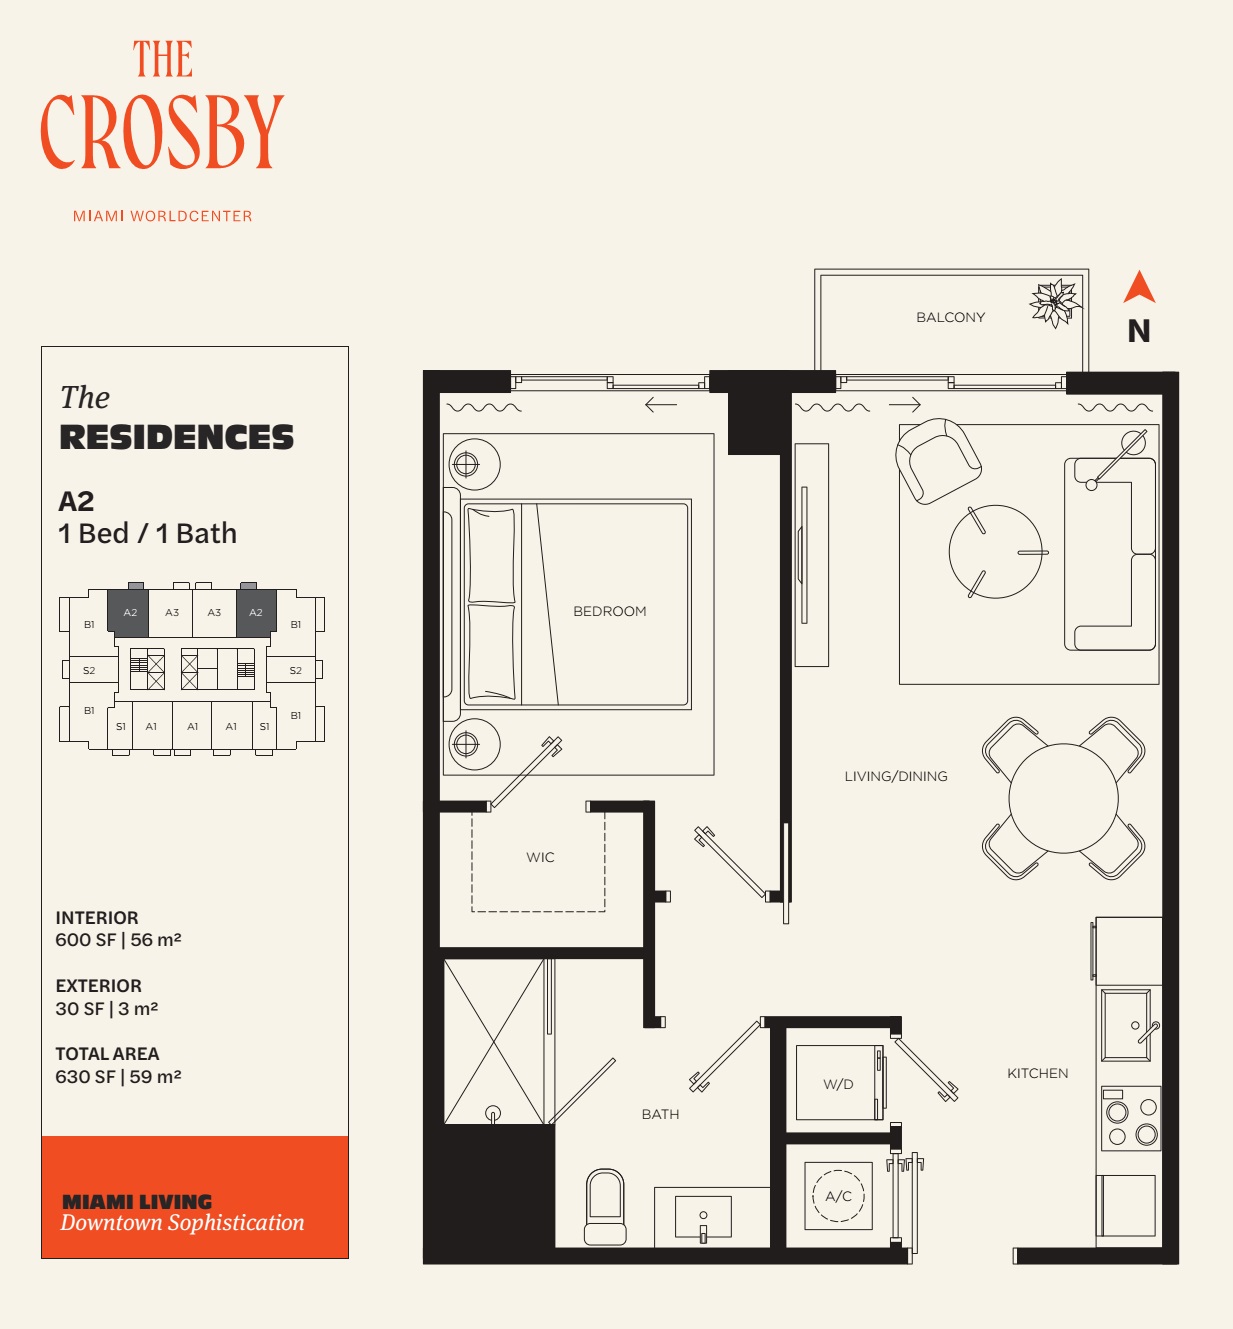 The Crosby Miami Worldcenter Residence A2